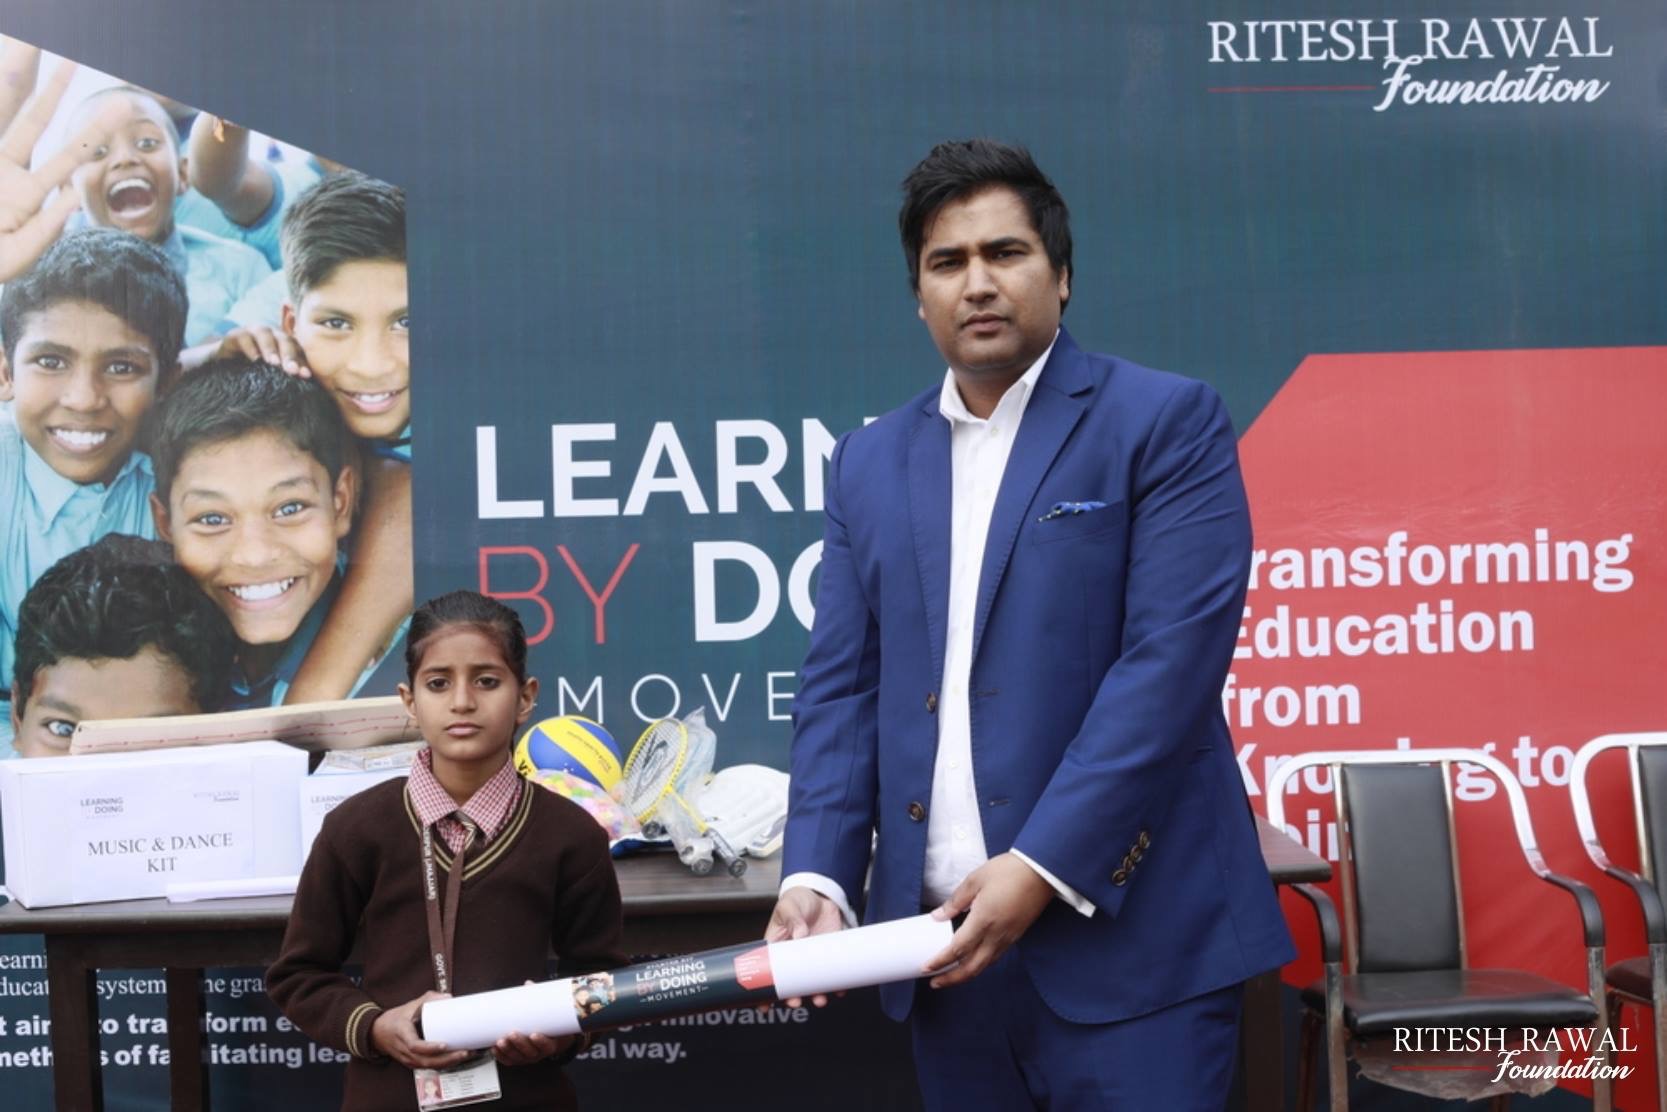 On World Child Labor Day, Ritesh Rawal Foundation launches ‘Learning by Doing Movement’ decoding=